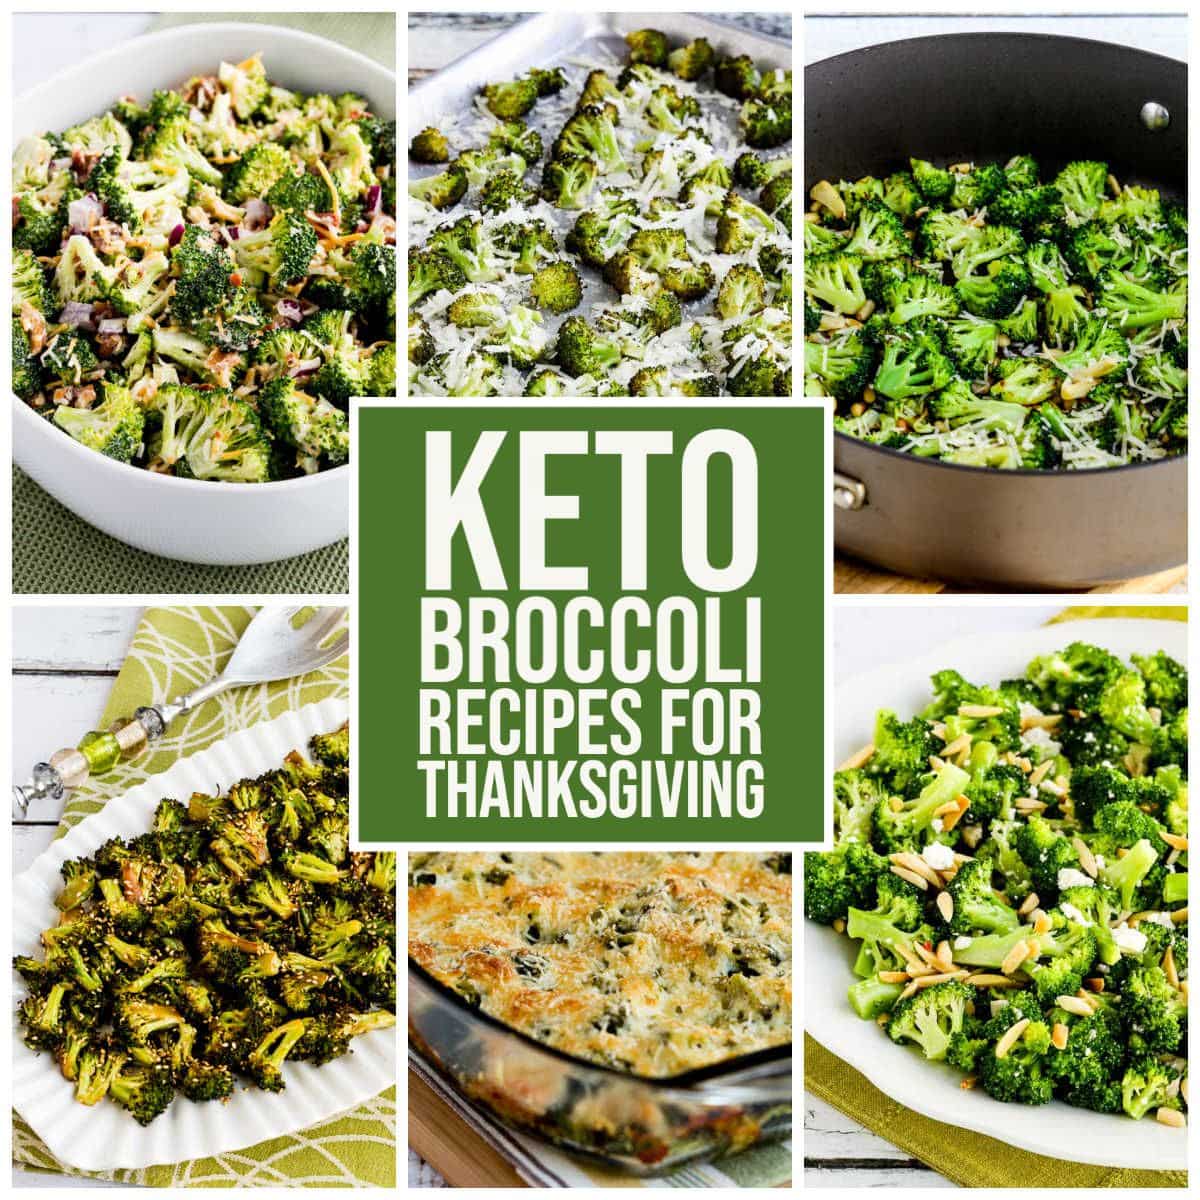 Keto Broccoli Recipes for Thanksgiving collage of featured recipes with text overlay